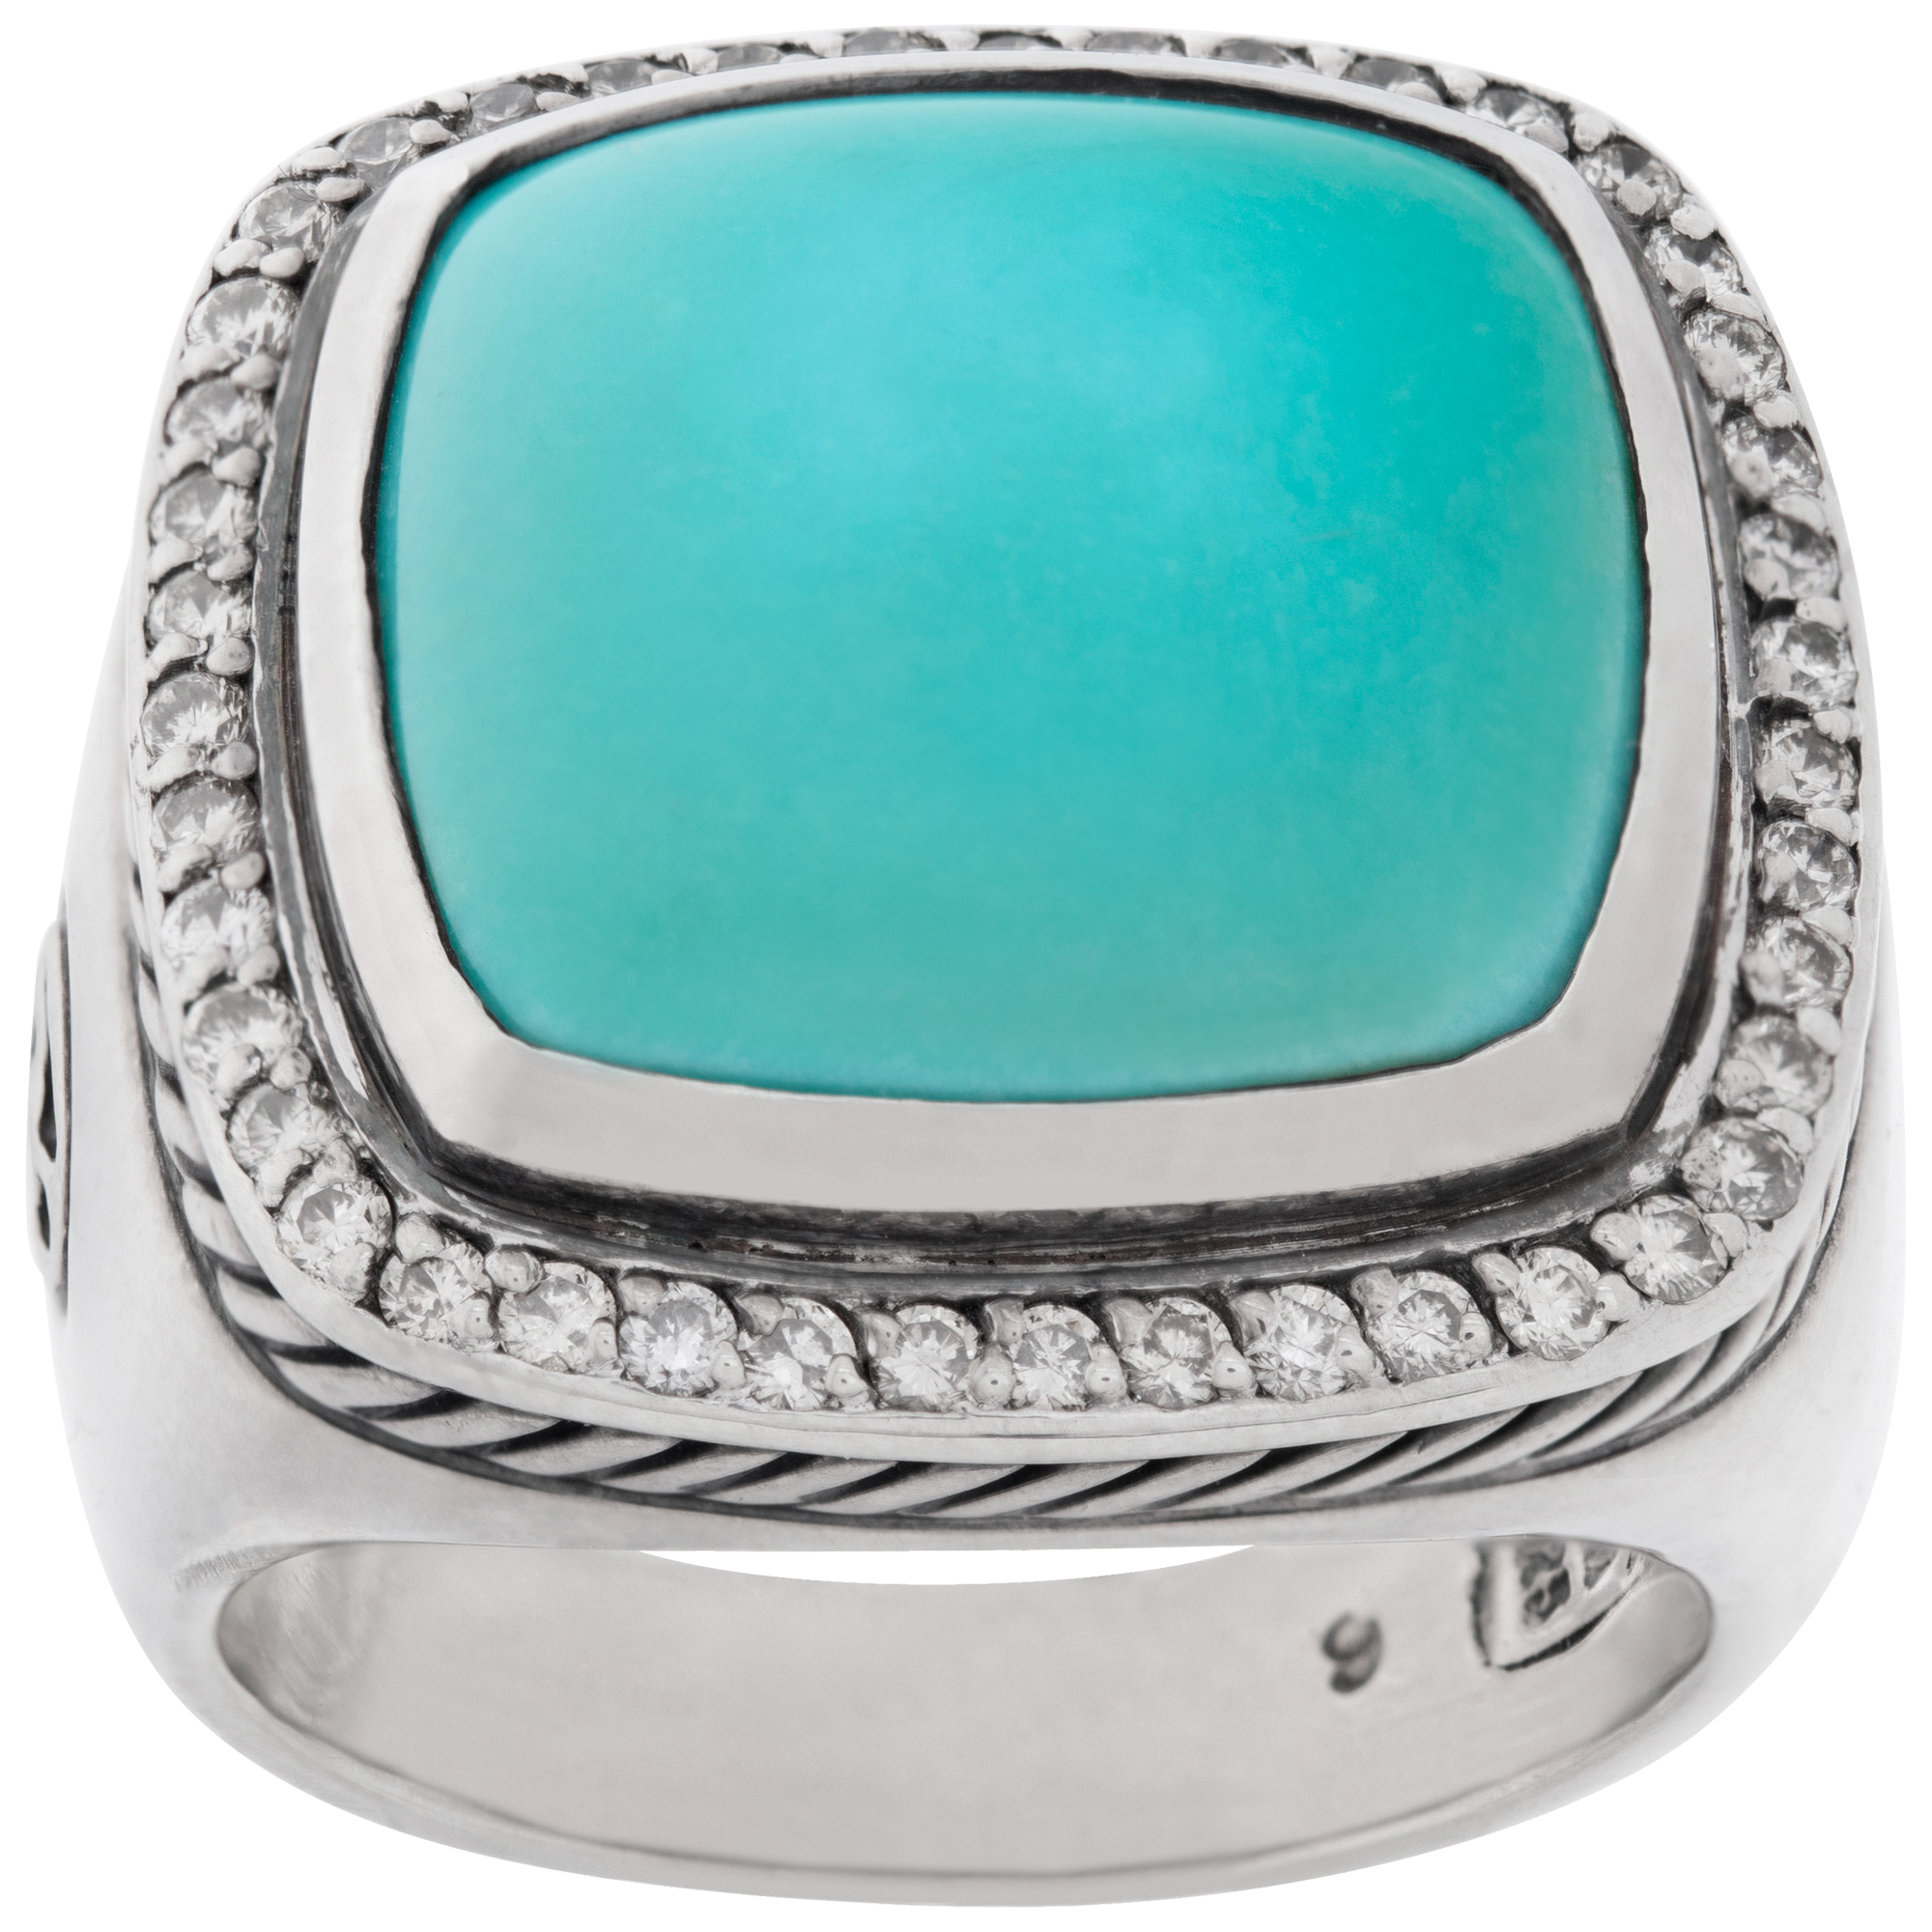 David Yurman Turquoise Albion ring in sterling silver ring with diamond accents image 1